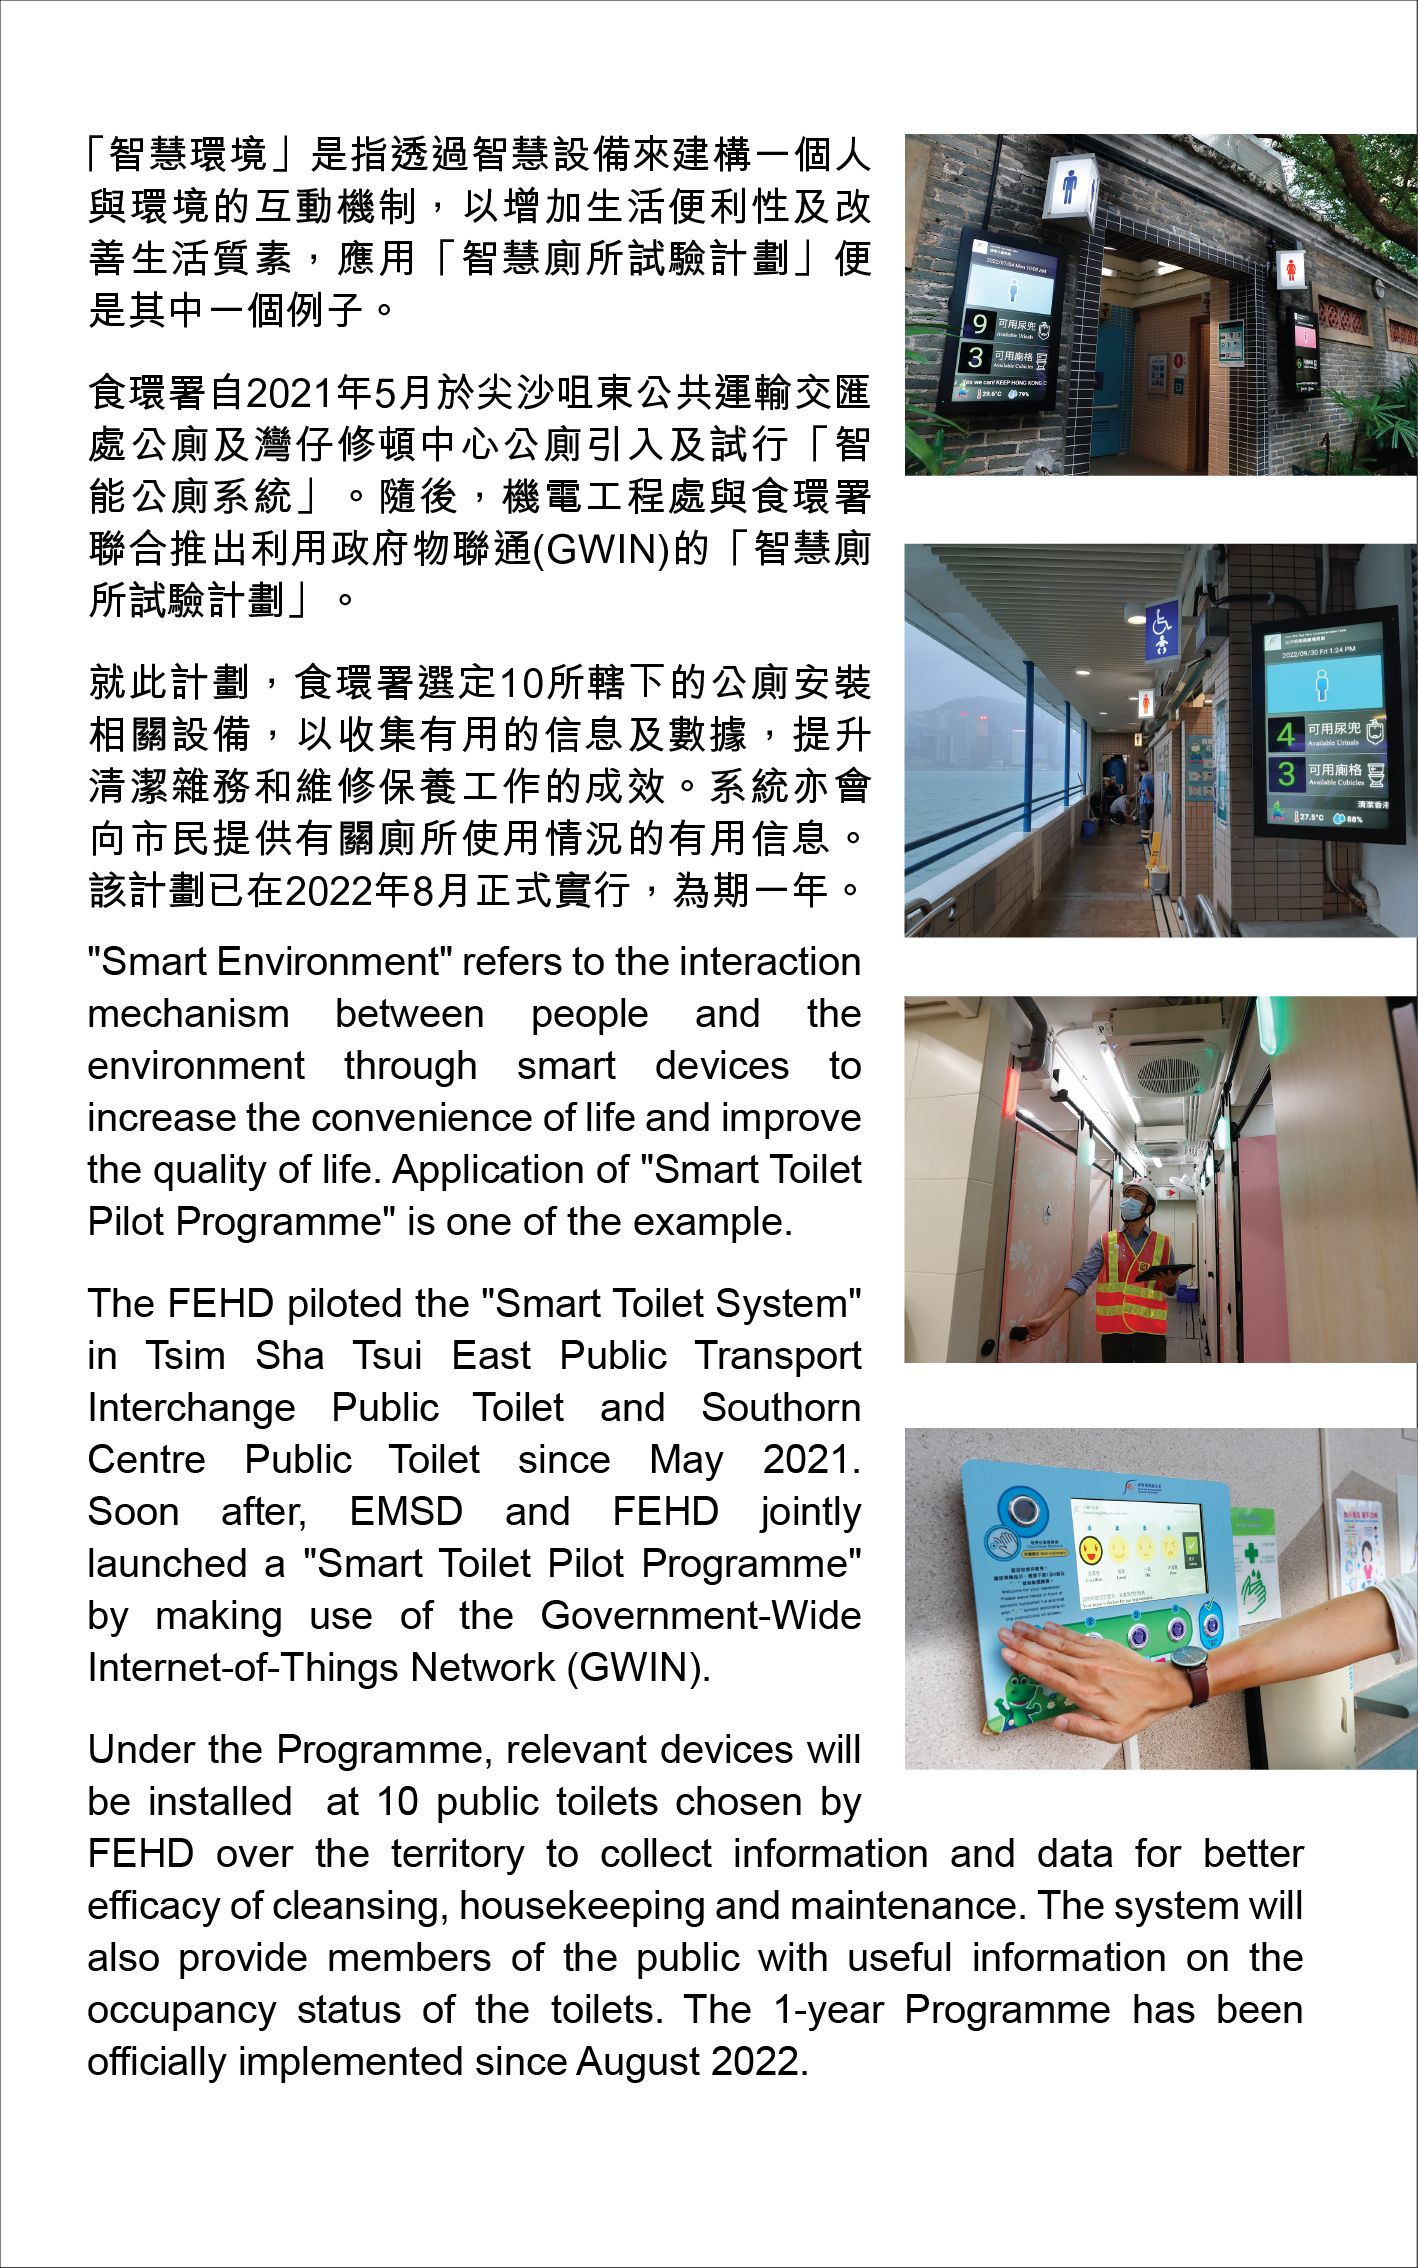 "Smart Environment" refers to the interaction mechanism between people and theenvironment through smart devices toincrease the convenience of life and improve the quality of life. Application of "Smart Toilet Pilot Programme" is one of the example. The FEHD piloted the "Smart Toilet System" in Tsim Sha Tsui East Public TransportInterchange Public Toilet and Southorn Centre Public Toilet since May 2021. Soon after, EMSD and FEHD jointly launched a "Smart Toilet Pilot Programme" by making use of the Government-WideInternet-of-Things Network (GWIN). Under the Programme, relevant devices will be installed  at 10 public toilets chosen by FEHD over the territory to collect information and data for betterefficacy of cleansing, housekeeping and maintenance. The system will also provide members of the public with useful information on the occupancy status of the toilets. The 1-year Programme has beenofficially implemented since August 2022.